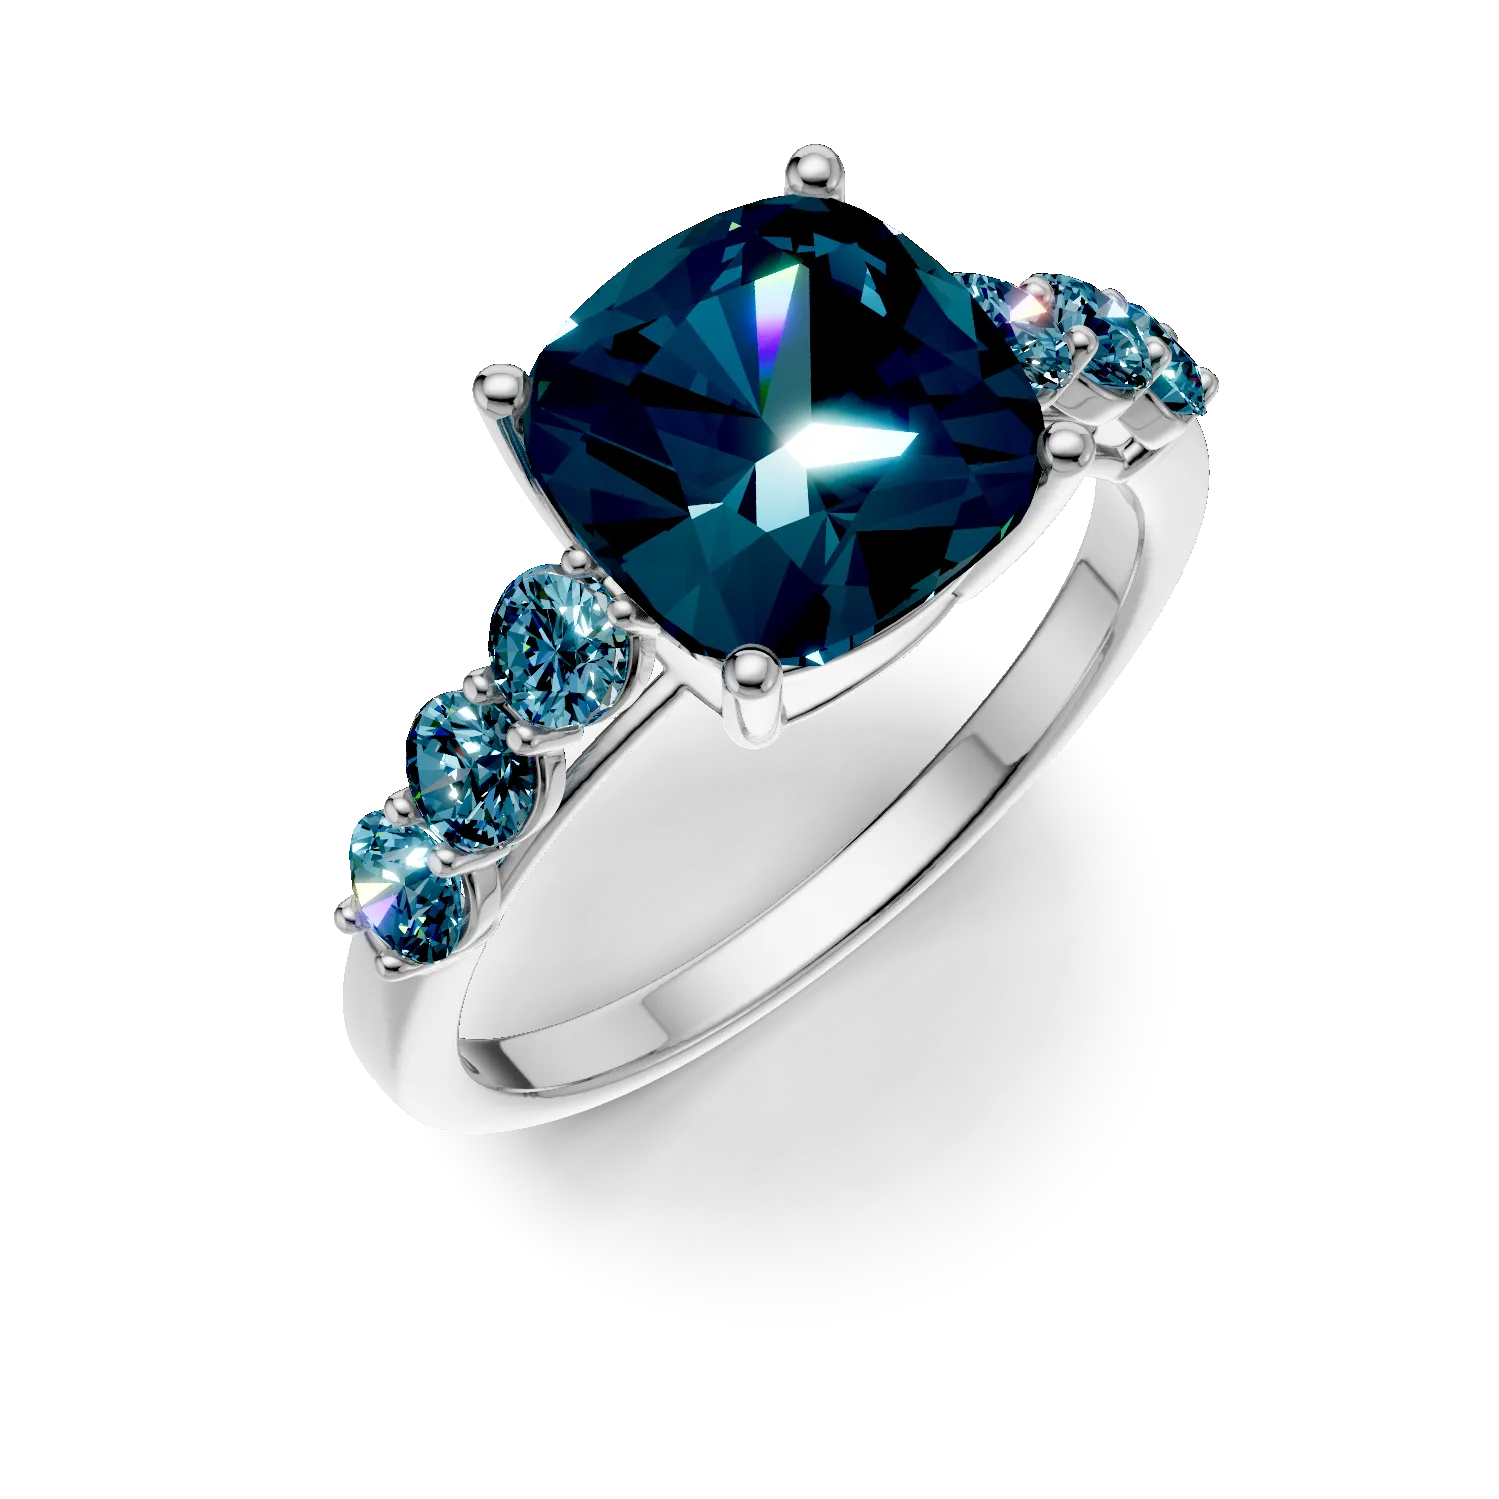 White gold ring with 4.9ct london blue topazes